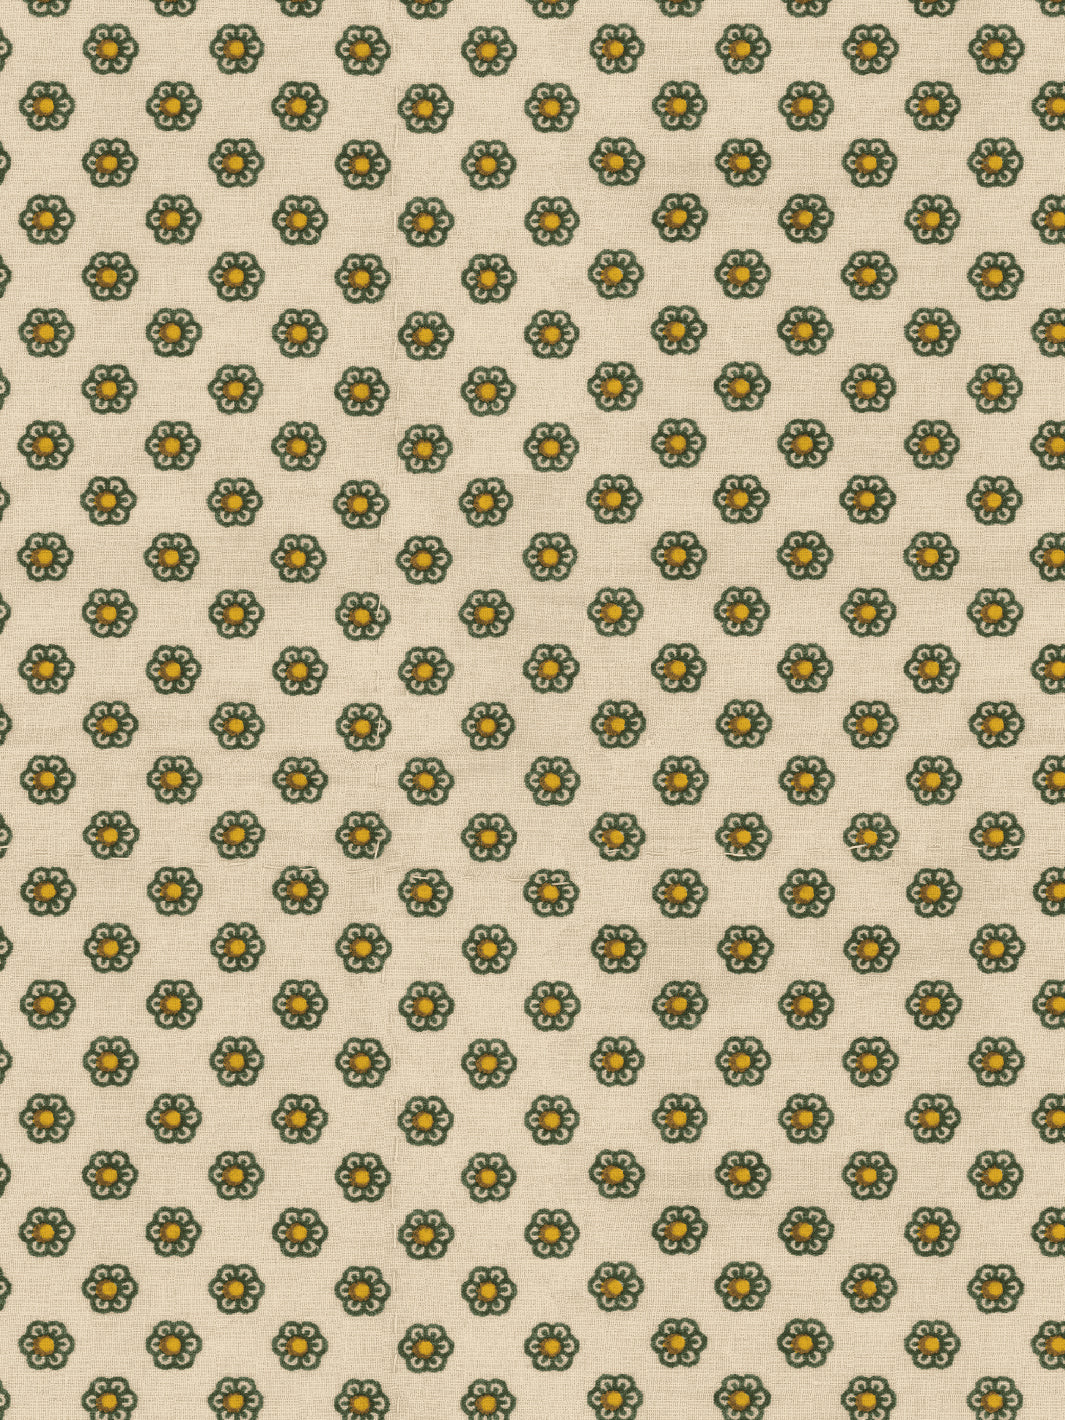 'Ditsy Flower' Wallpaper by Chris Benz - Green Yellow